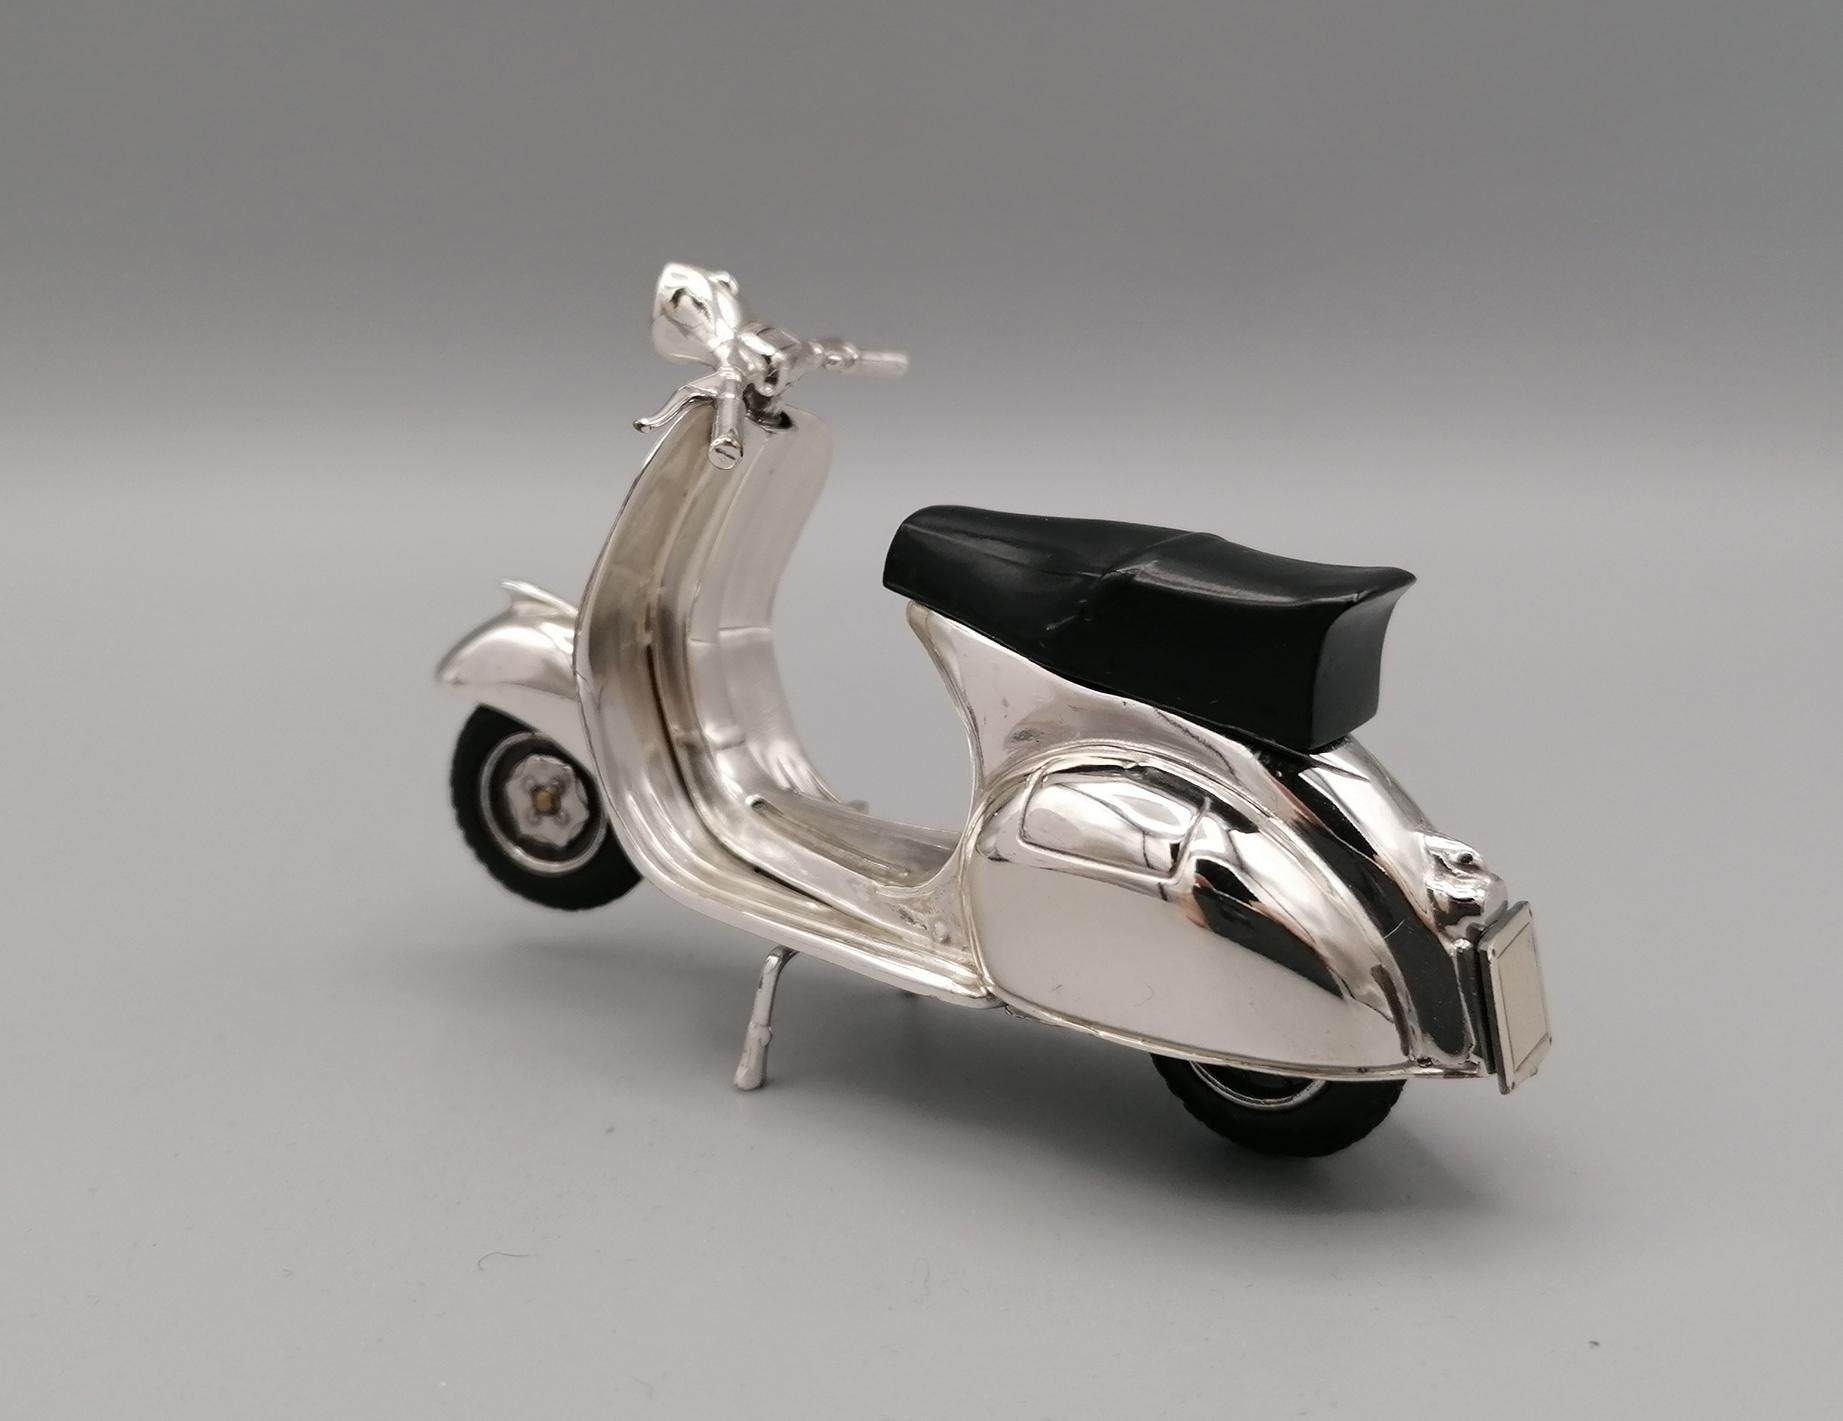 Miniature in sterling silver of the famous Vespa GS 150 produced by the Piaggio factory in pntedere - Italy - from 1955 to 1961.
The saddle is enameled in black while the tires are made of rubber.
Italian silverware, already with a centuries-old